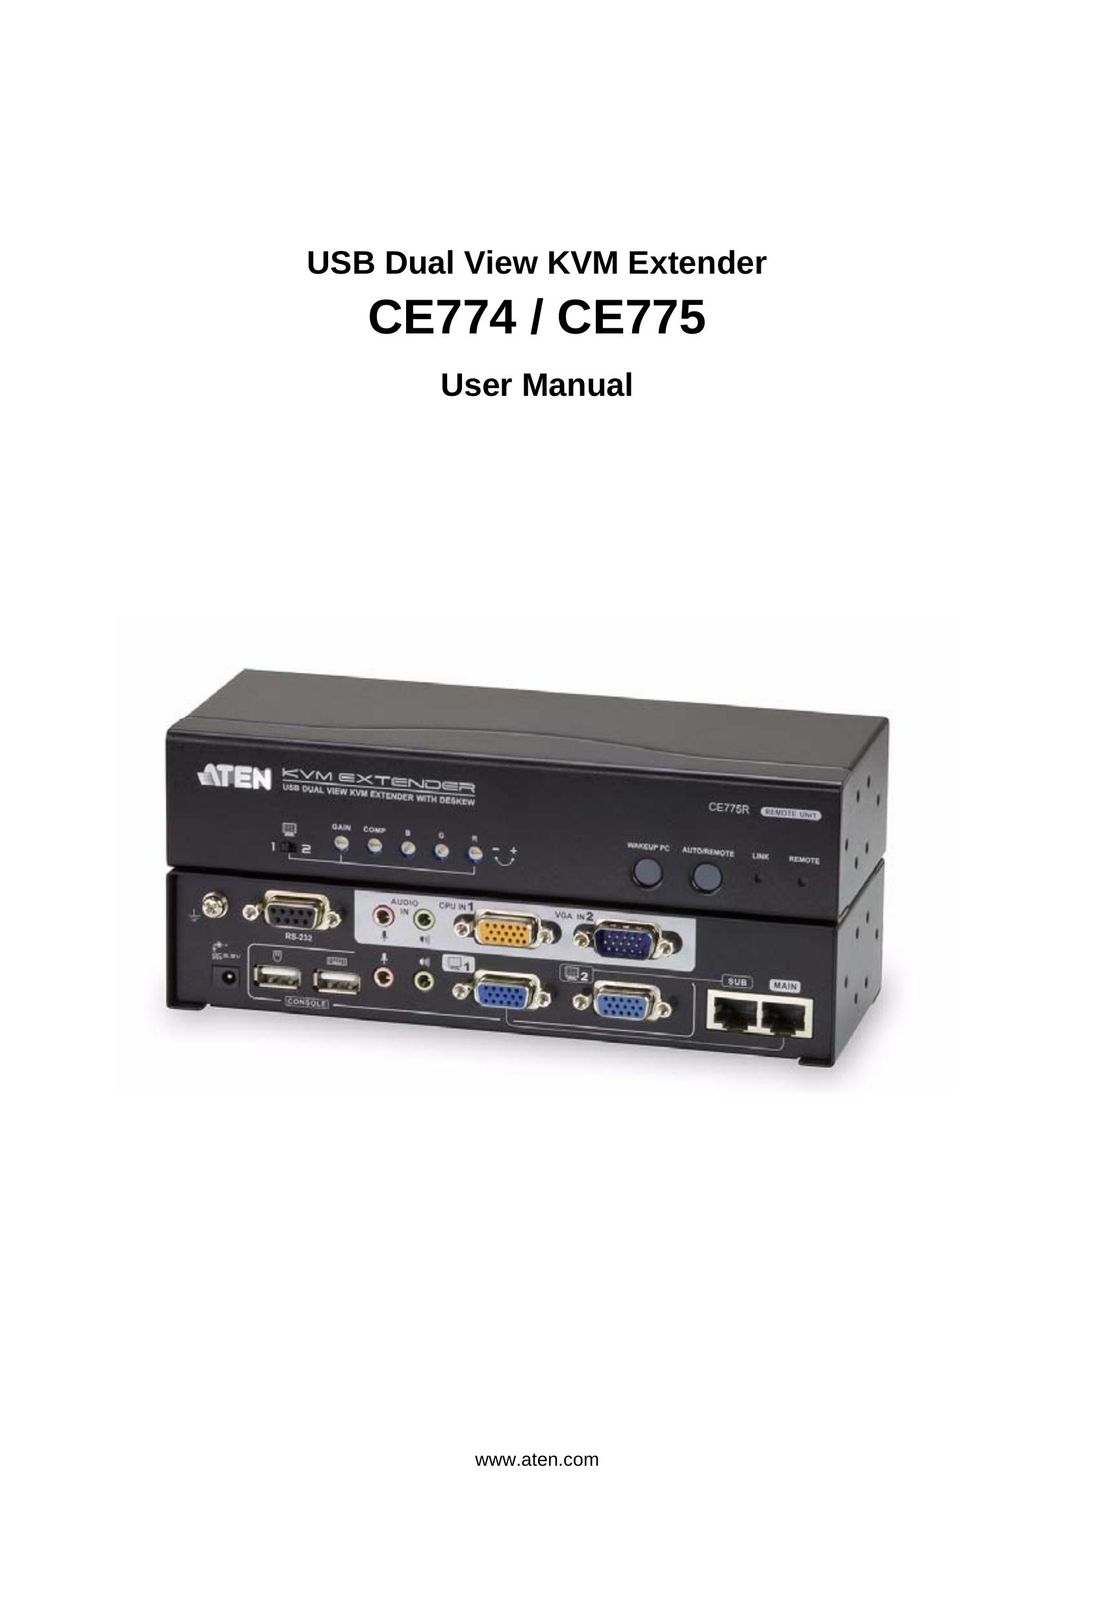 ATEN Technology CE774 Switch User Manual